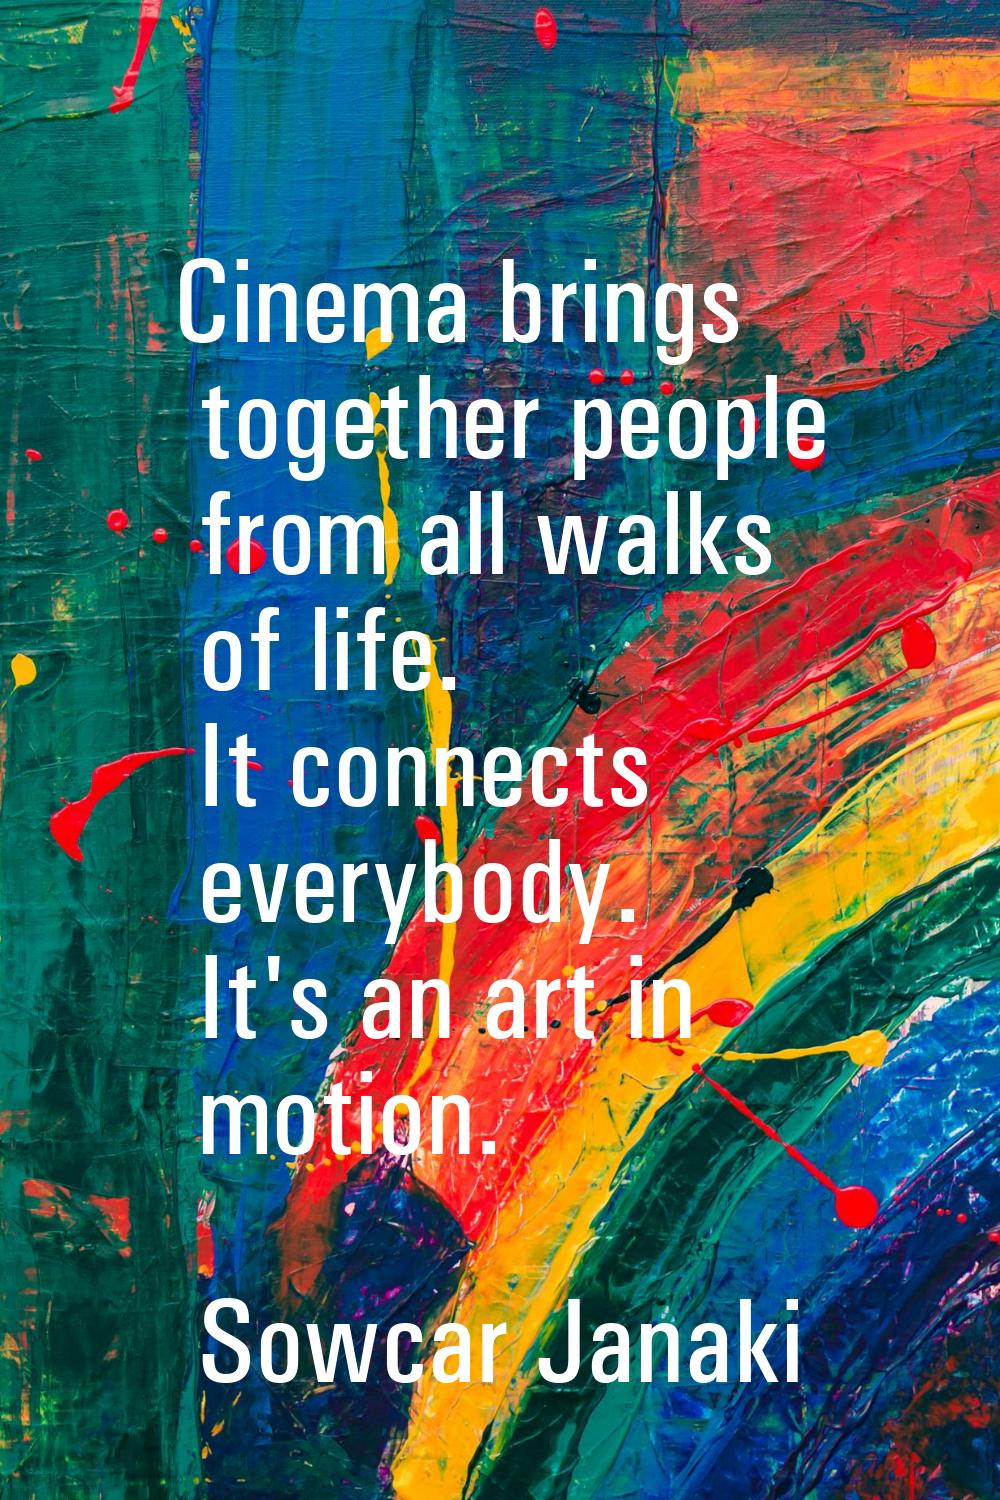 Cinema brings together people from all walks of life. It connects everybody. It's an art in motion.